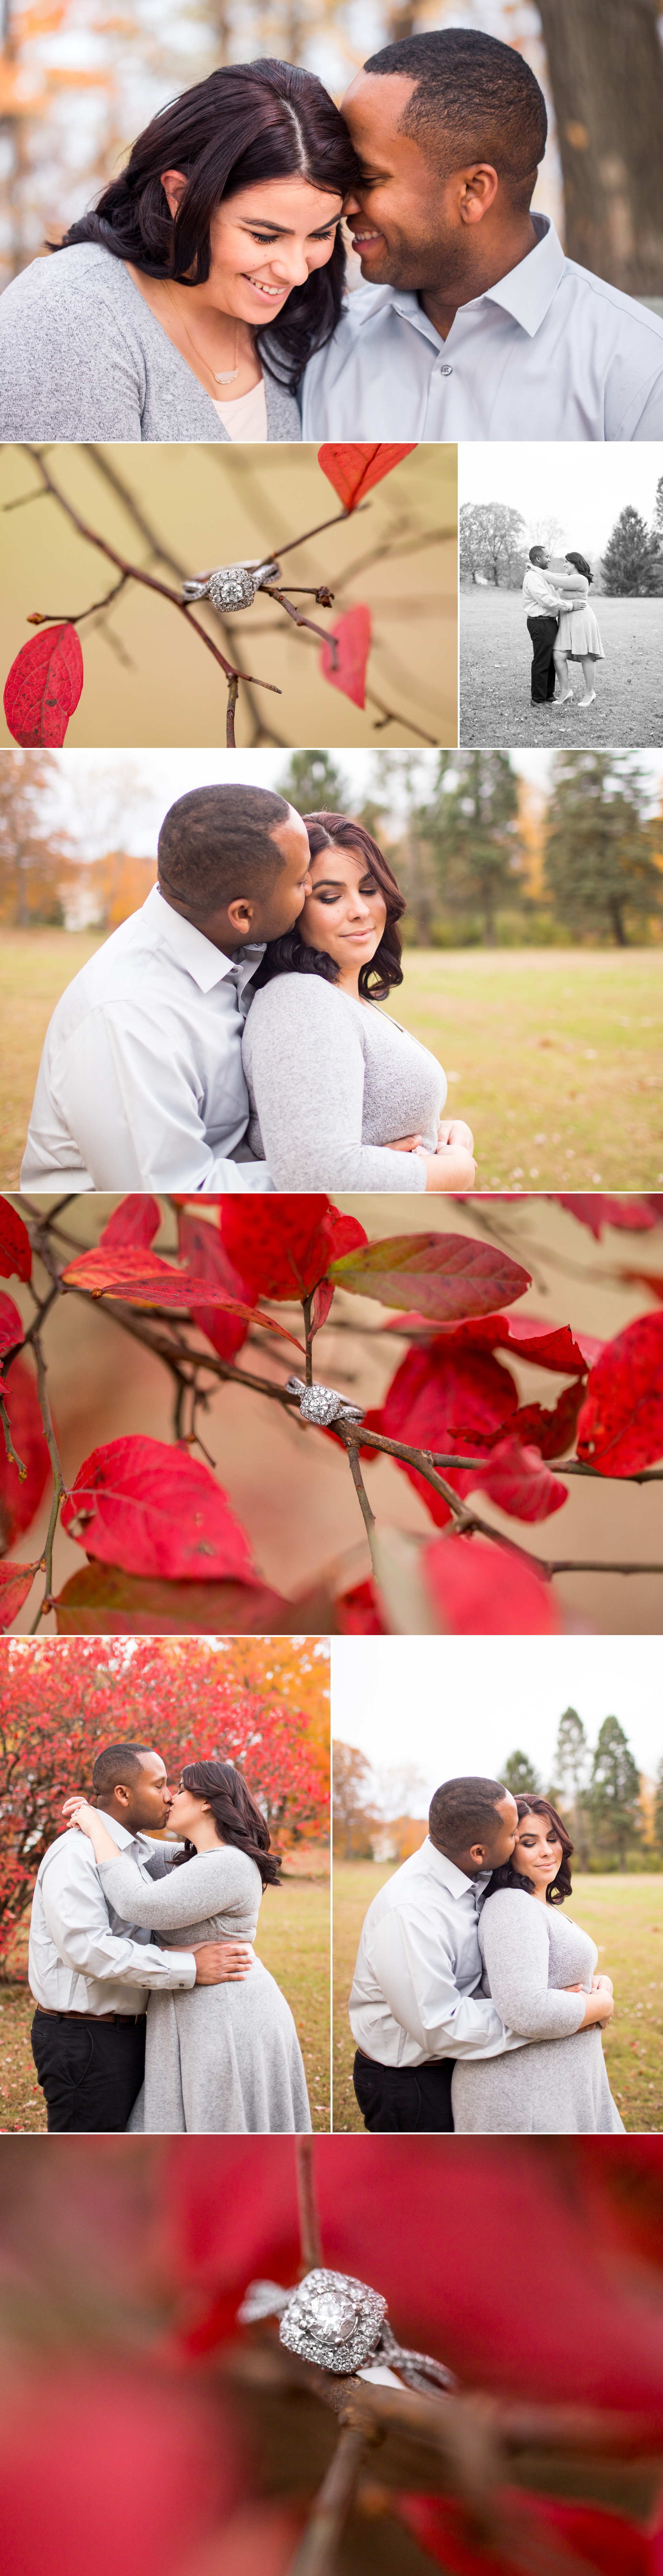 Stratford, CT Engagement Session at Boothe Memorial Park | CT, NYC, New England + Destination Luxury Wedding + Engagement Photographer | Shaina Lee Photography